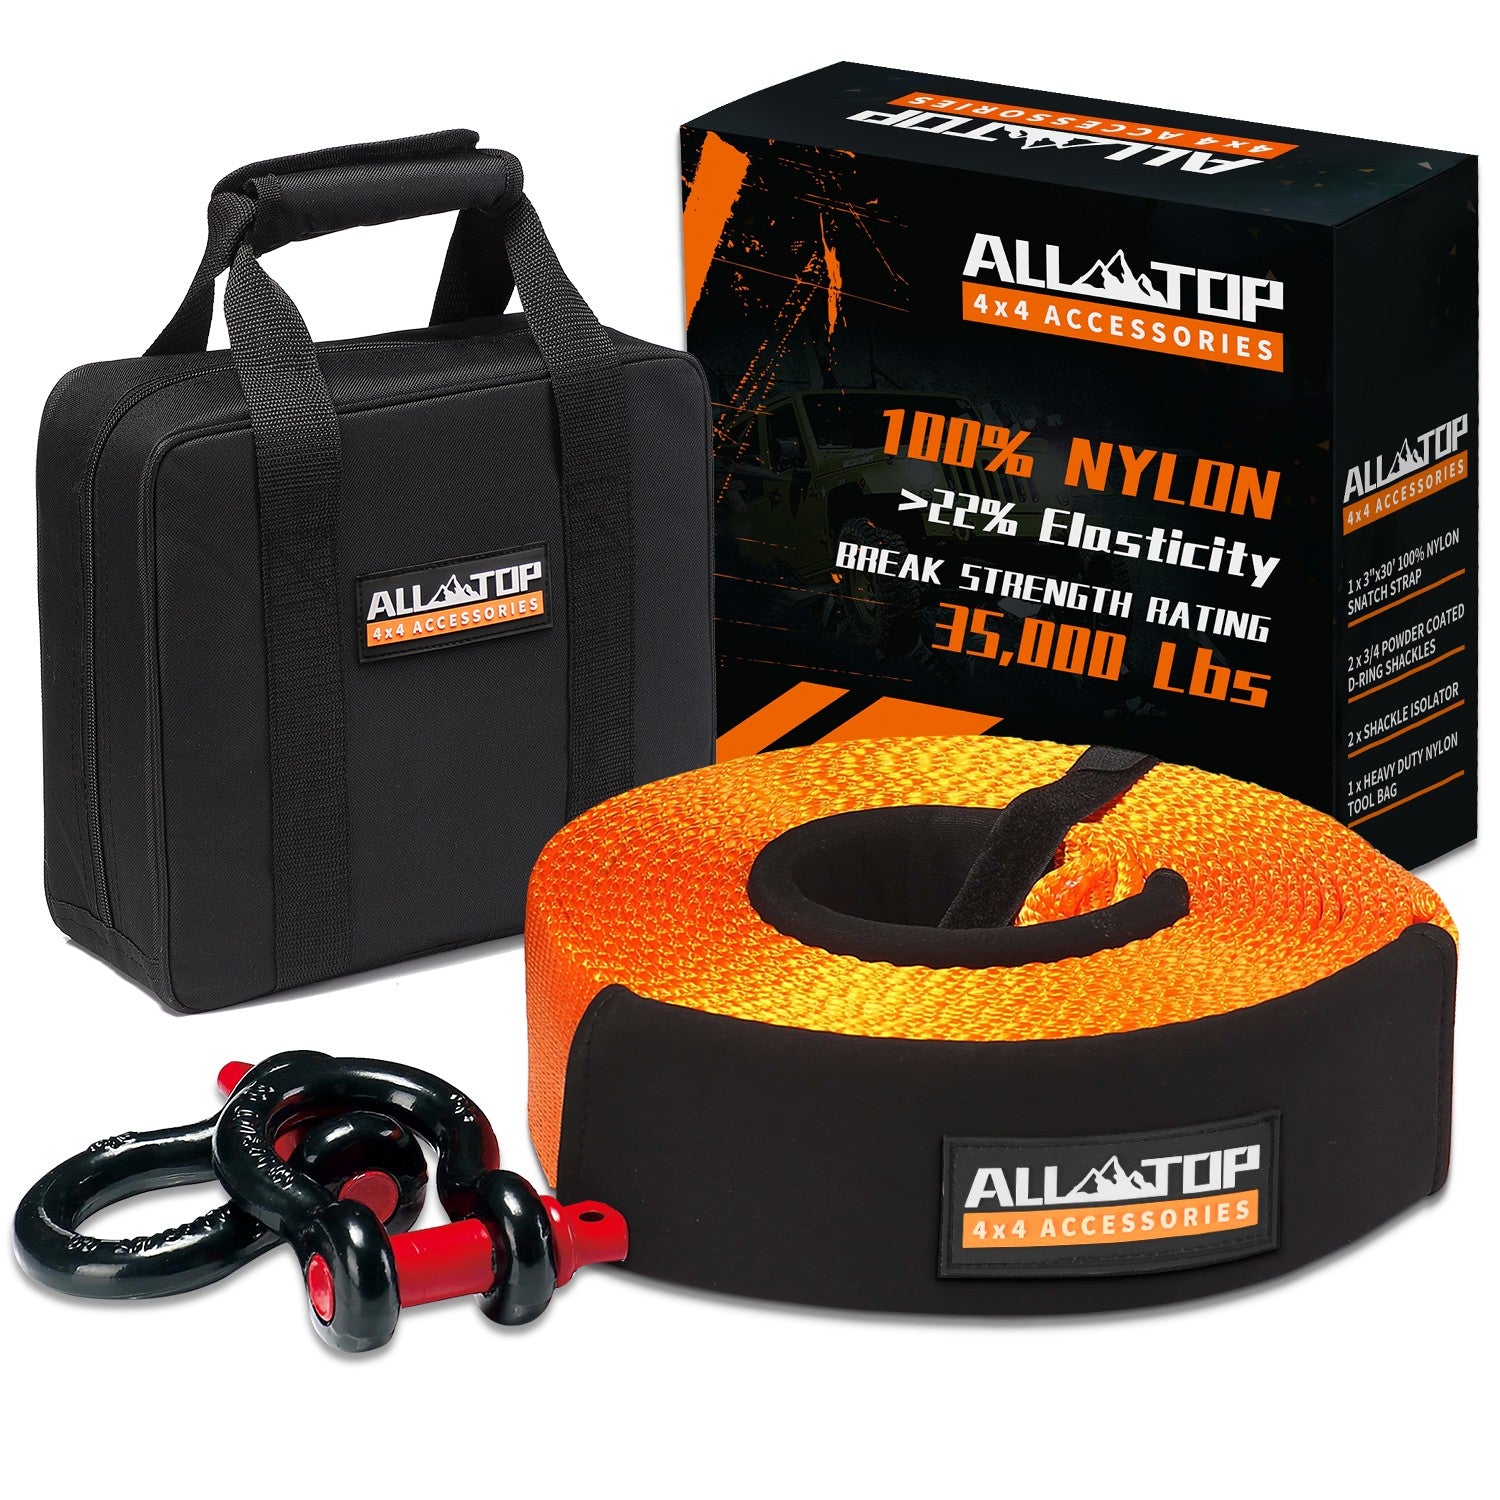 ALL-TOP Recovery Strap Kit w/ Shackles: Strap 3in x 30ft - 35,000 Lbs